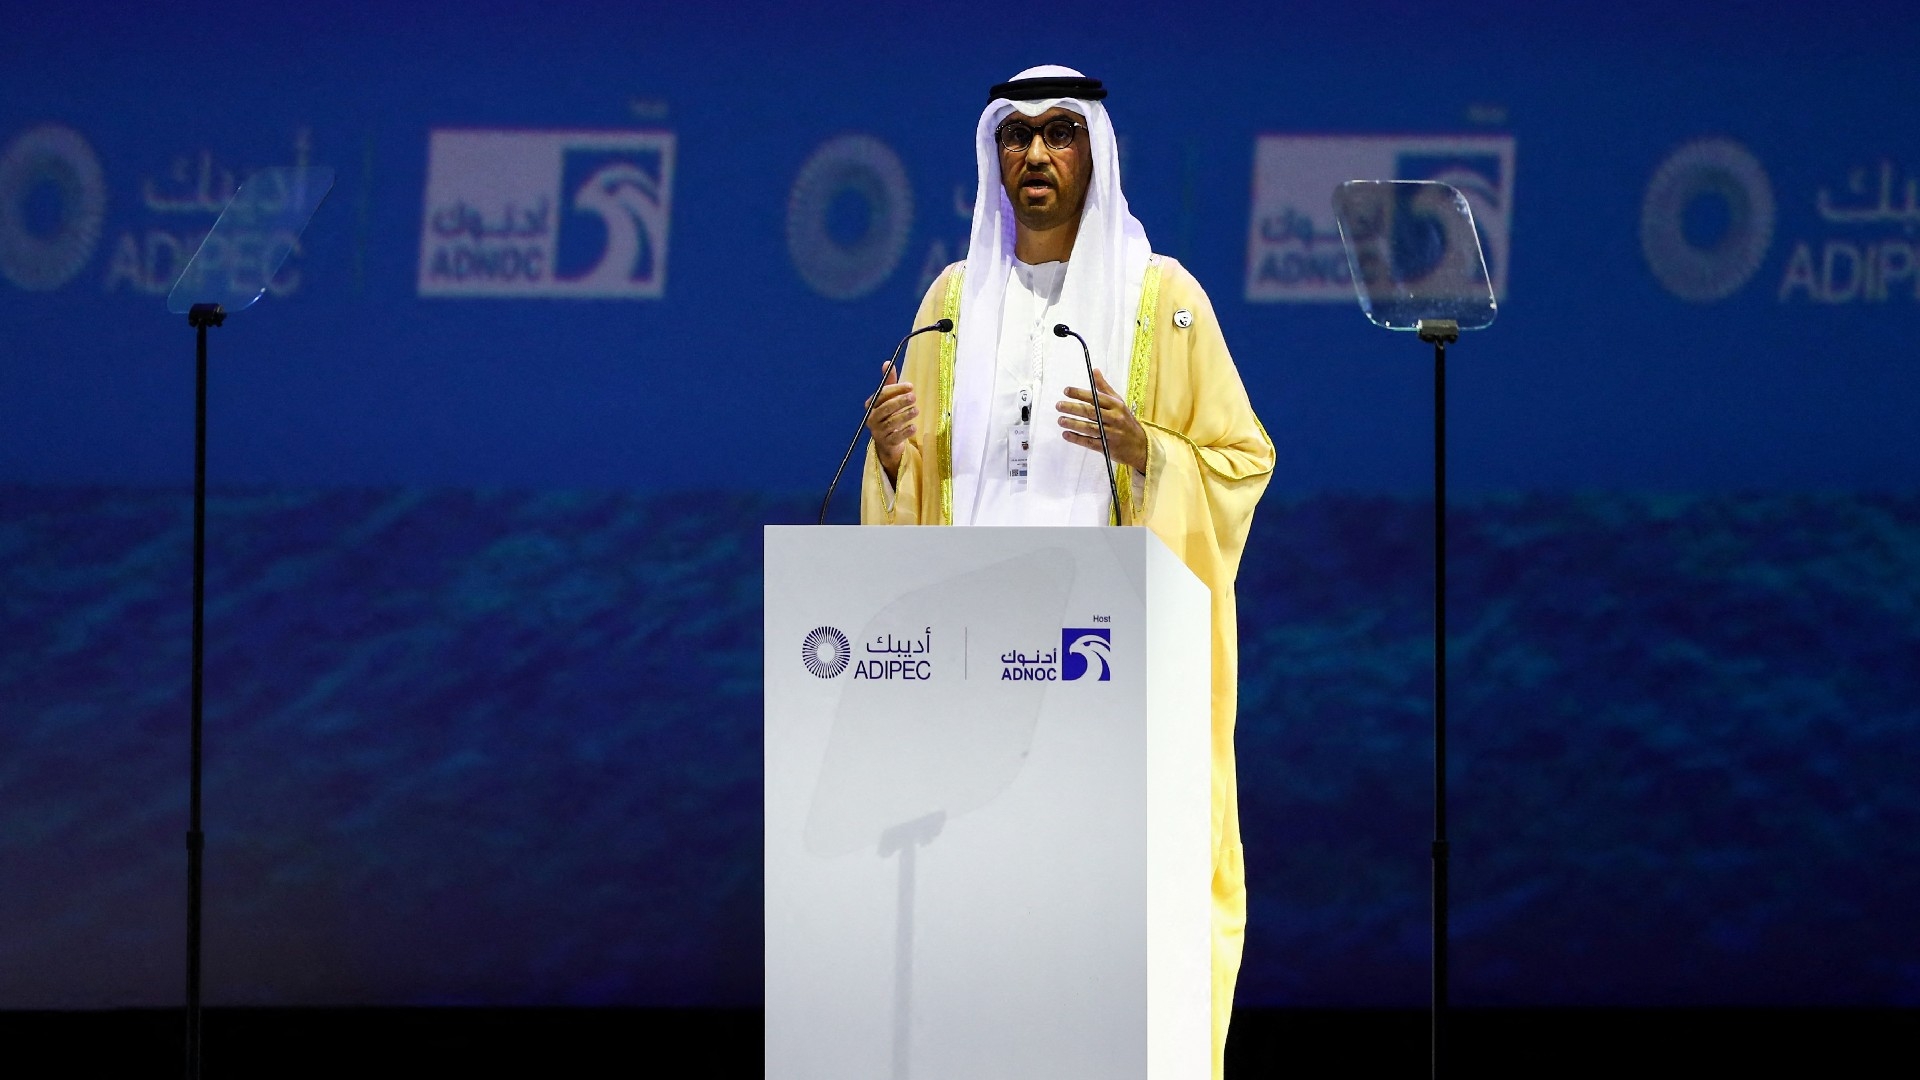 United Arab Emirates' Industry Minister Sultan Ahmed Al Jaber speaks during the Abu Dhabi International Petroleum Exhibition and Conference (ADIPEC) in Abu Dhabi on 31 October 2022 (Reuters)